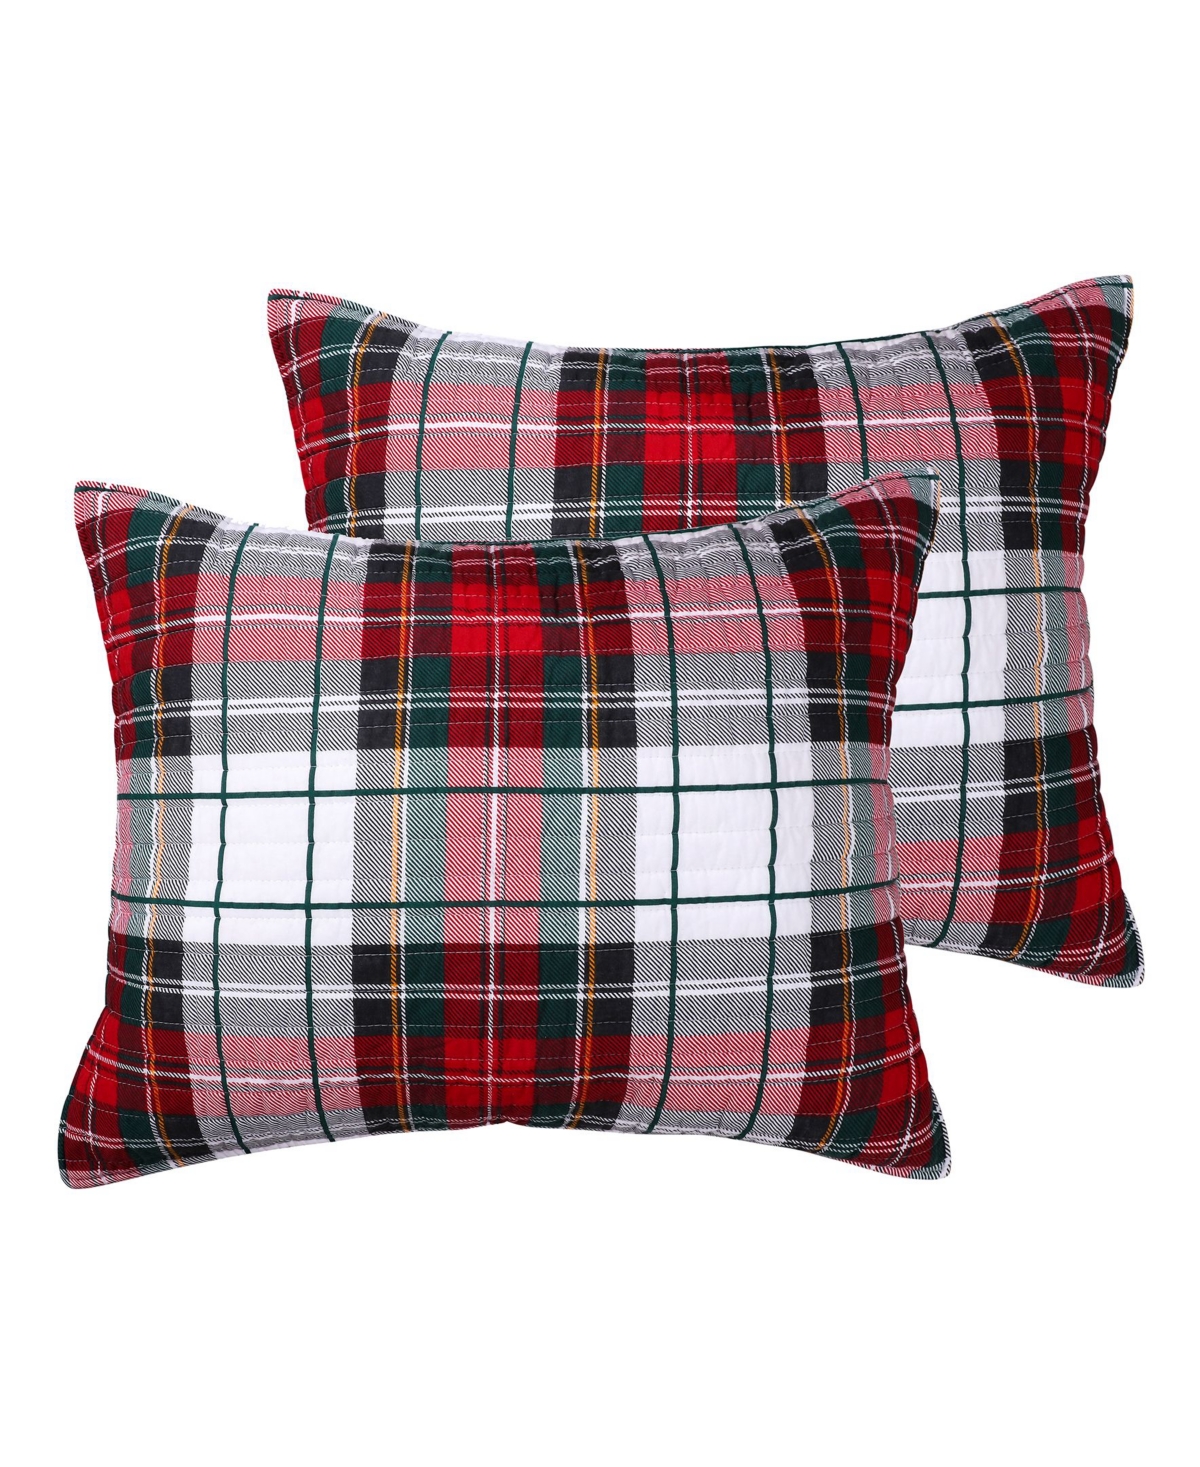 Spencer Red Plaid Quilted 2-Pc. Sham Set, King - Multi